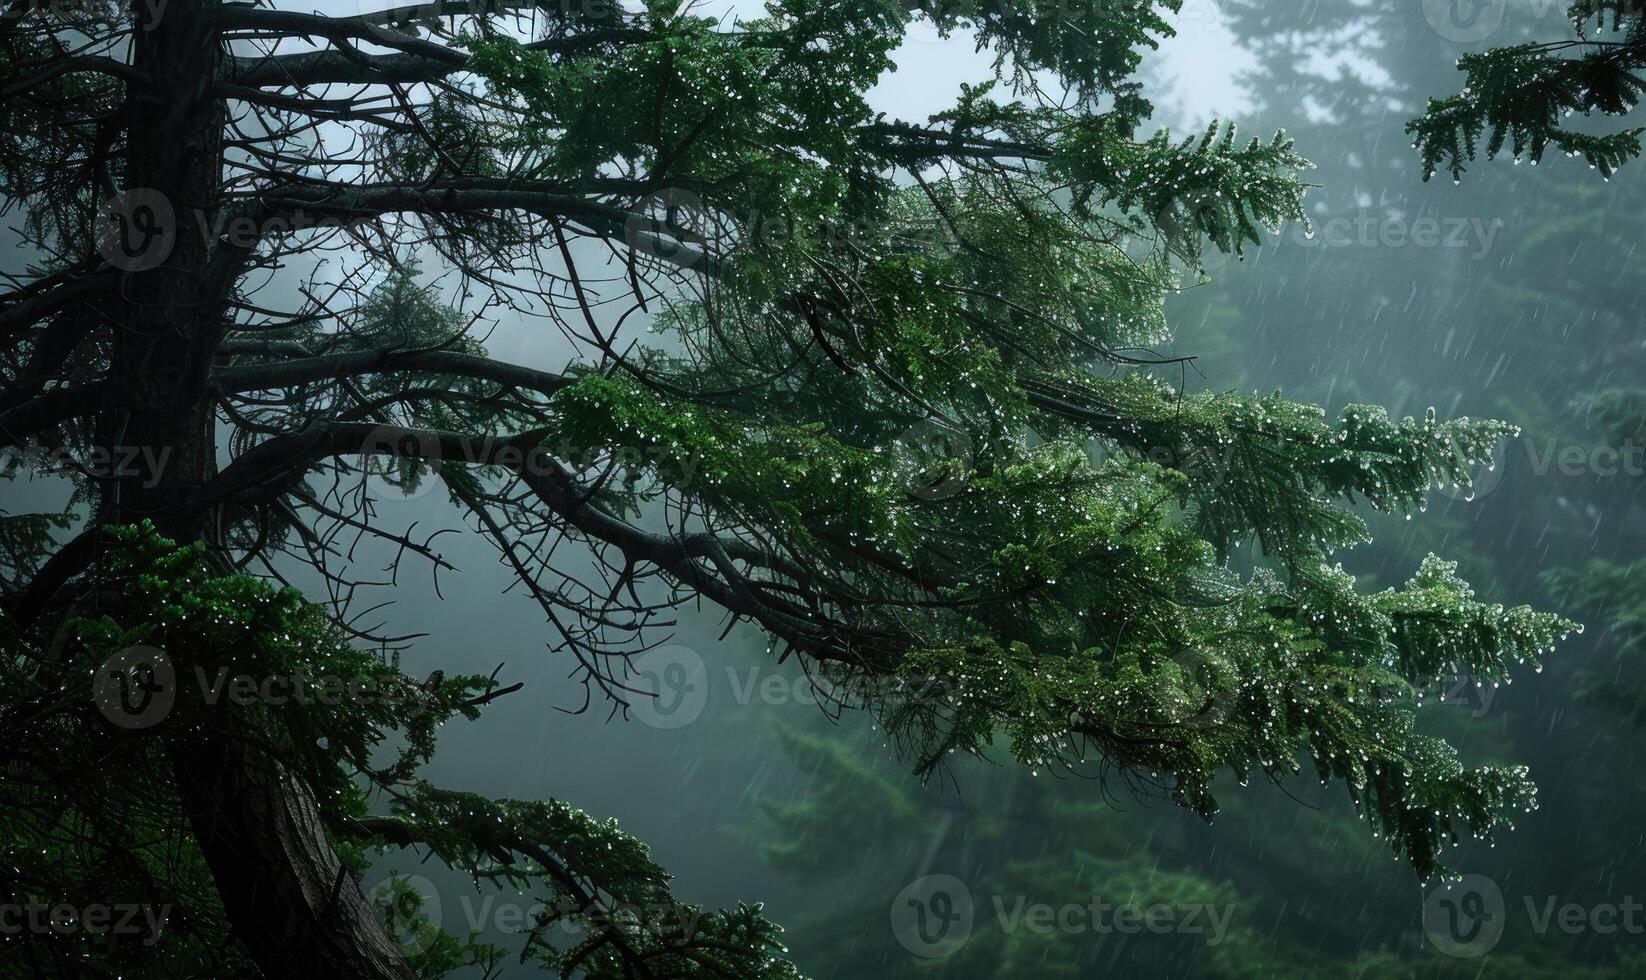 A cedar tree standing tall in a misty forest, angle view photo